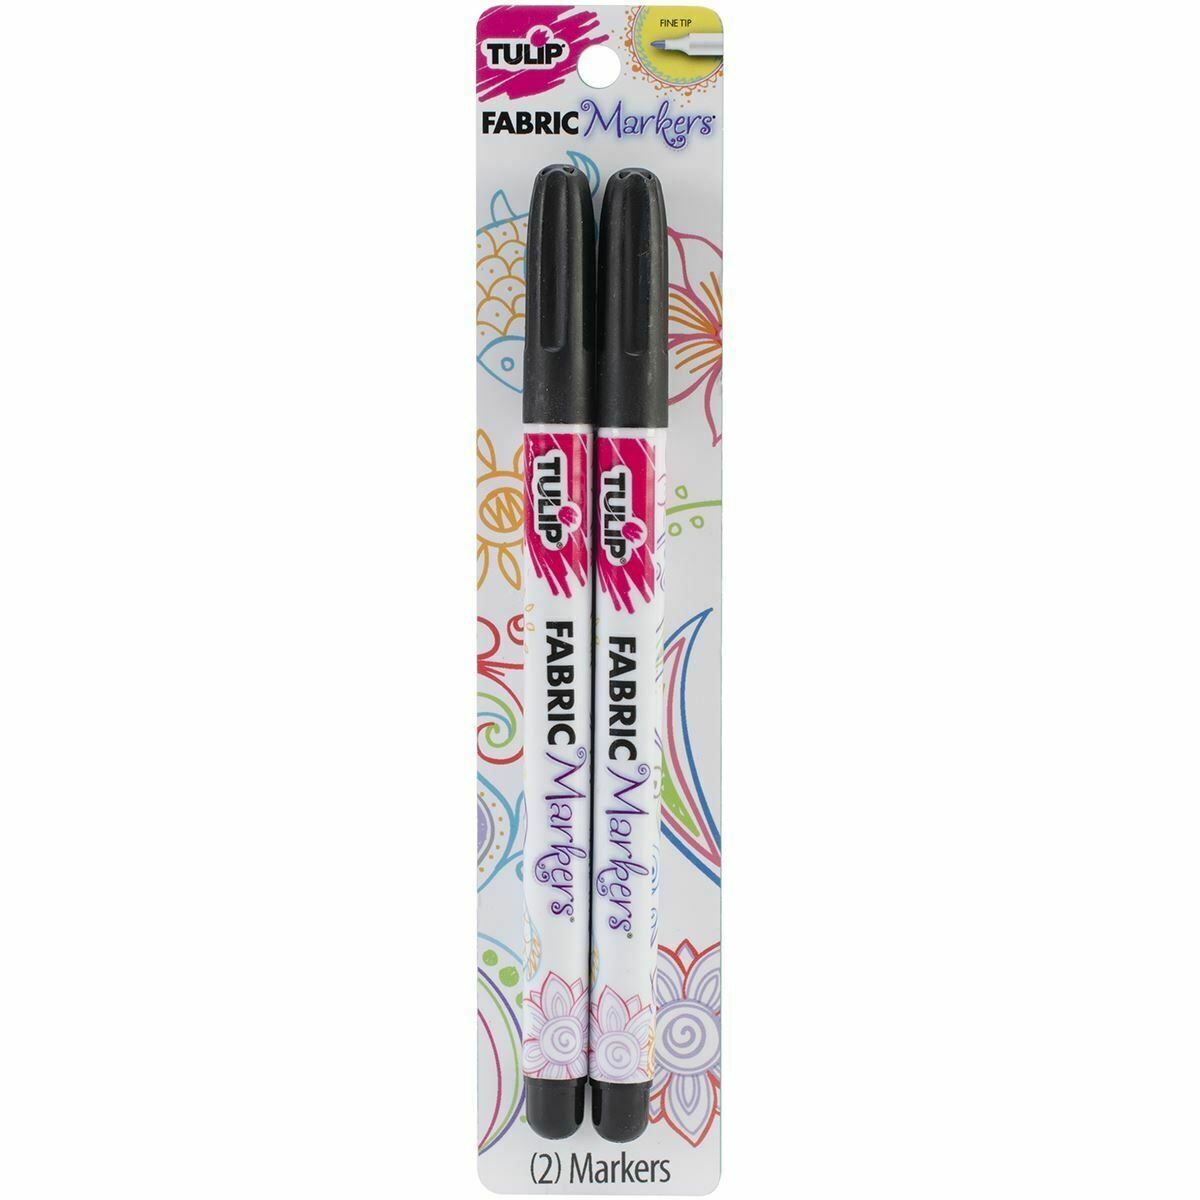 32035 Fine Tip Fabric Markers - Black (2 pack) by Tulip